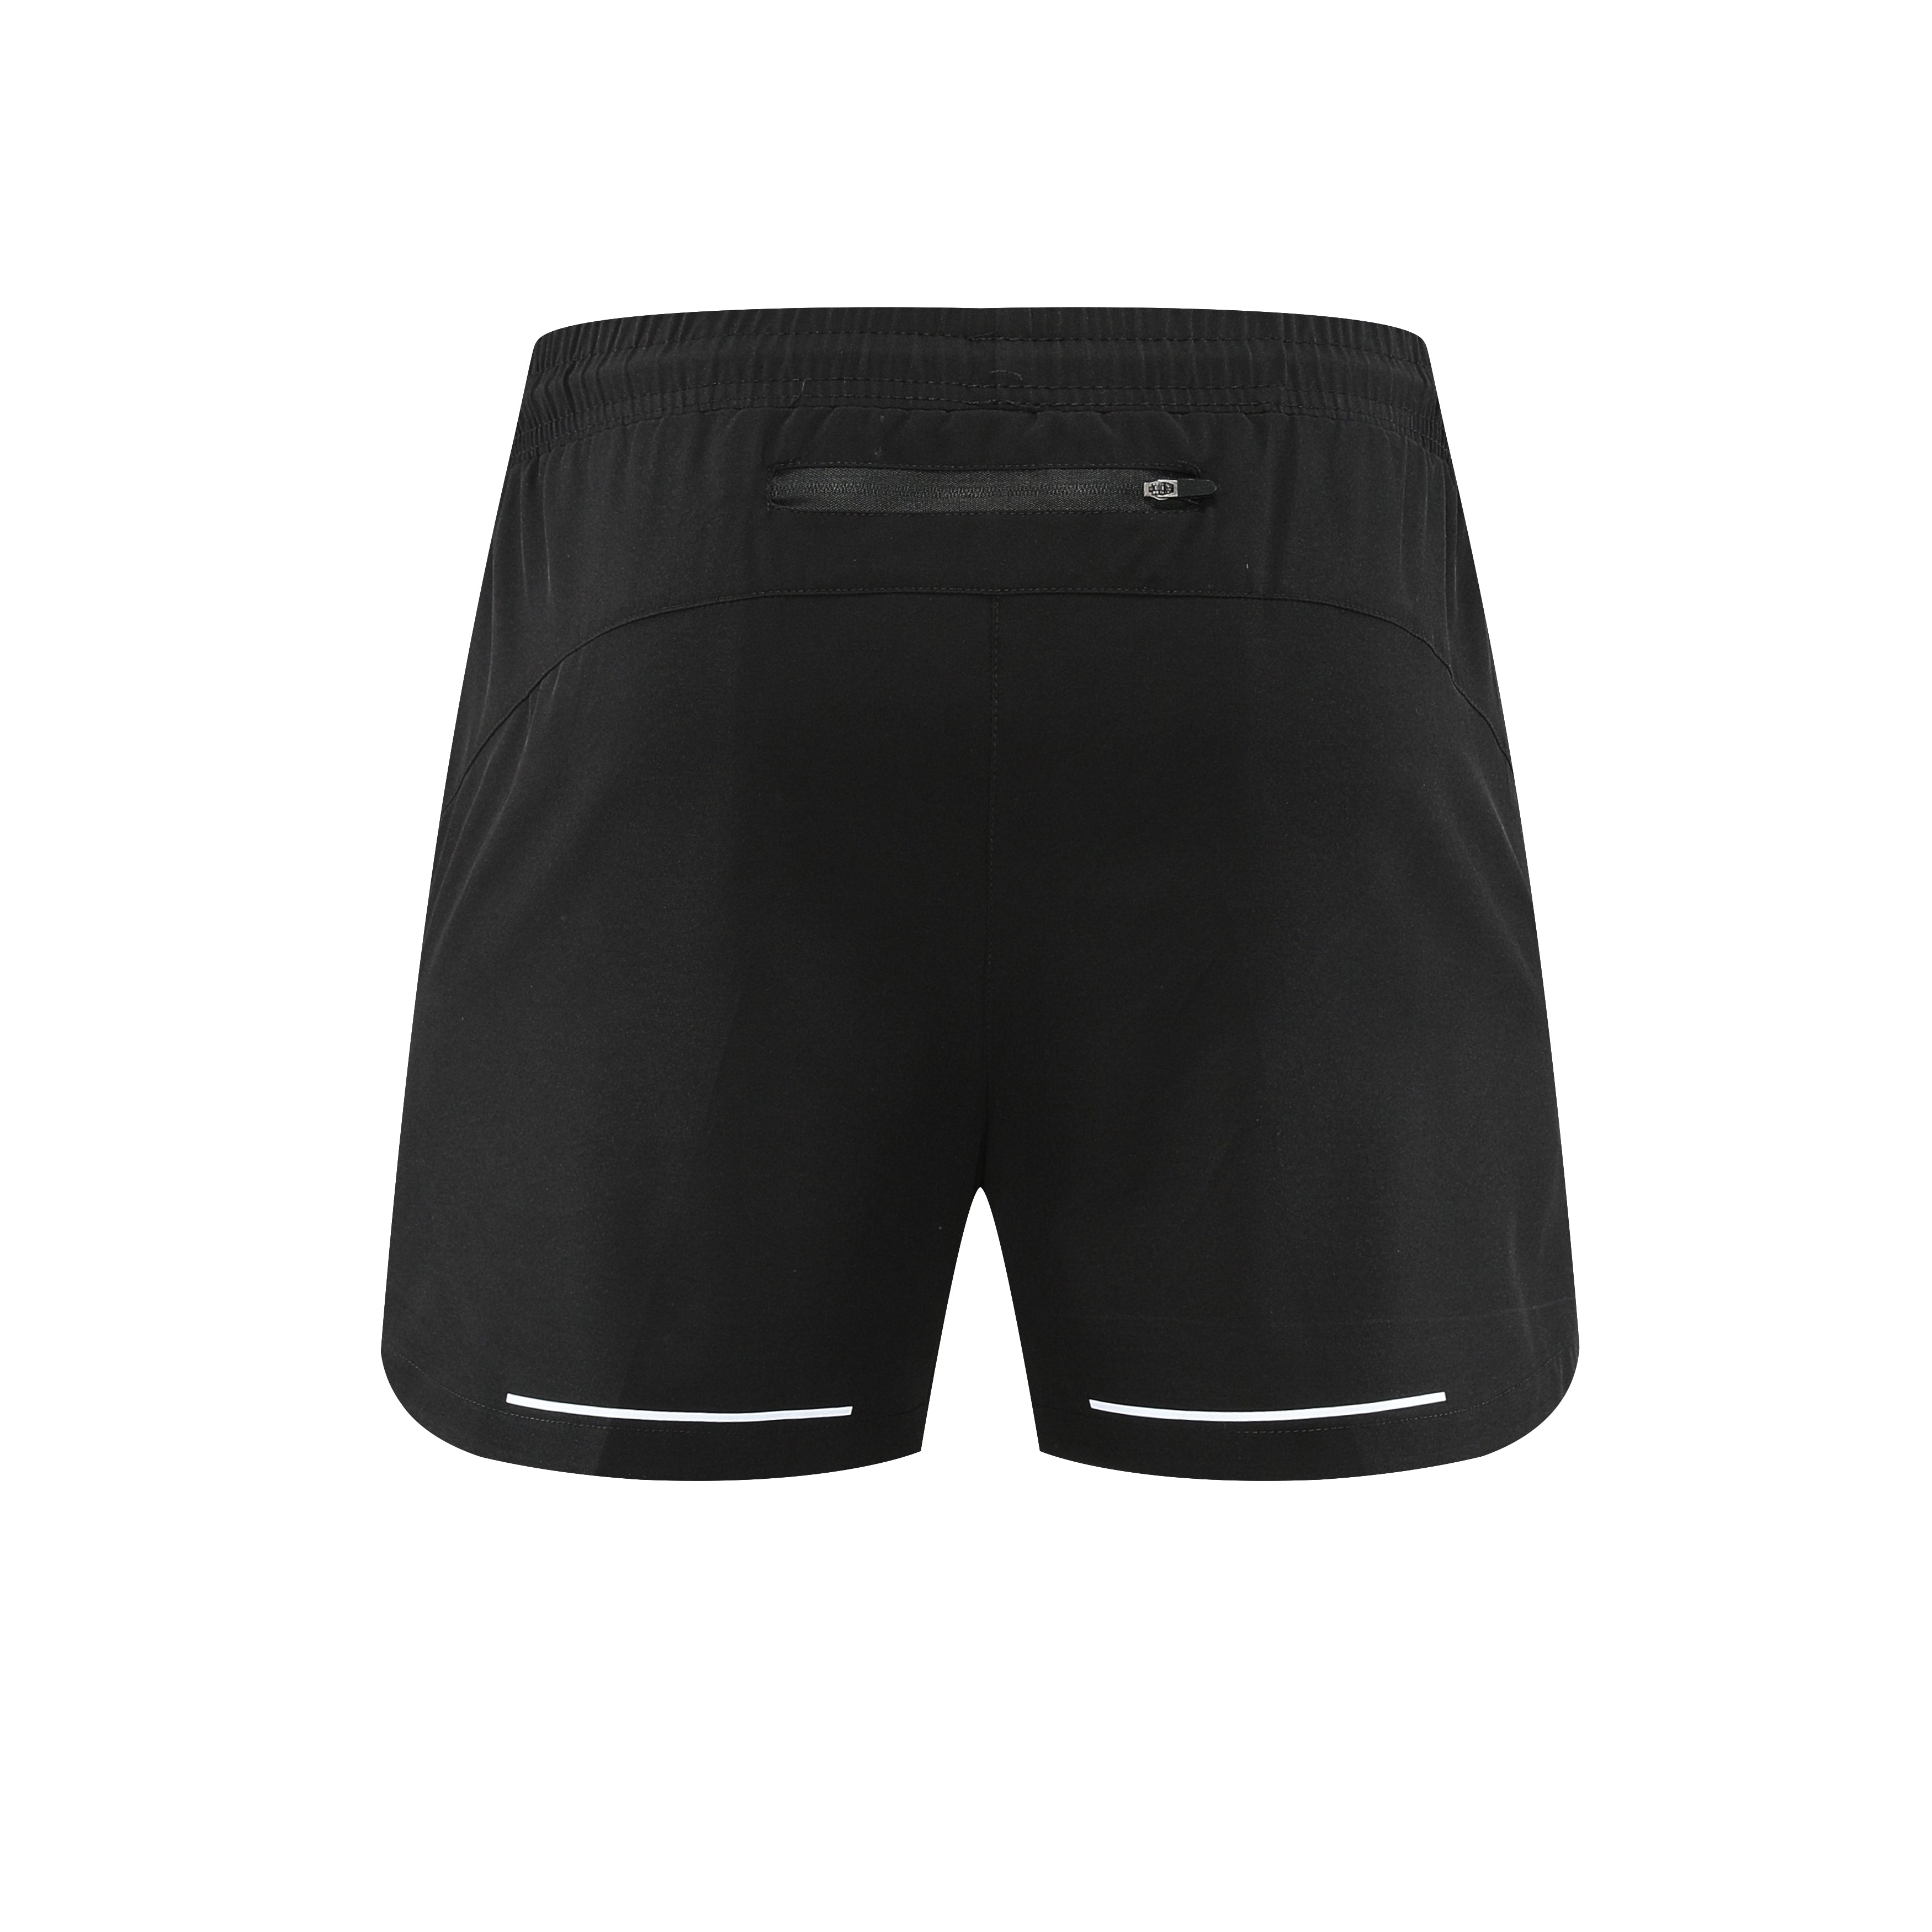 Men's Quick Dry May Contain Whiskey Graphic Shorts